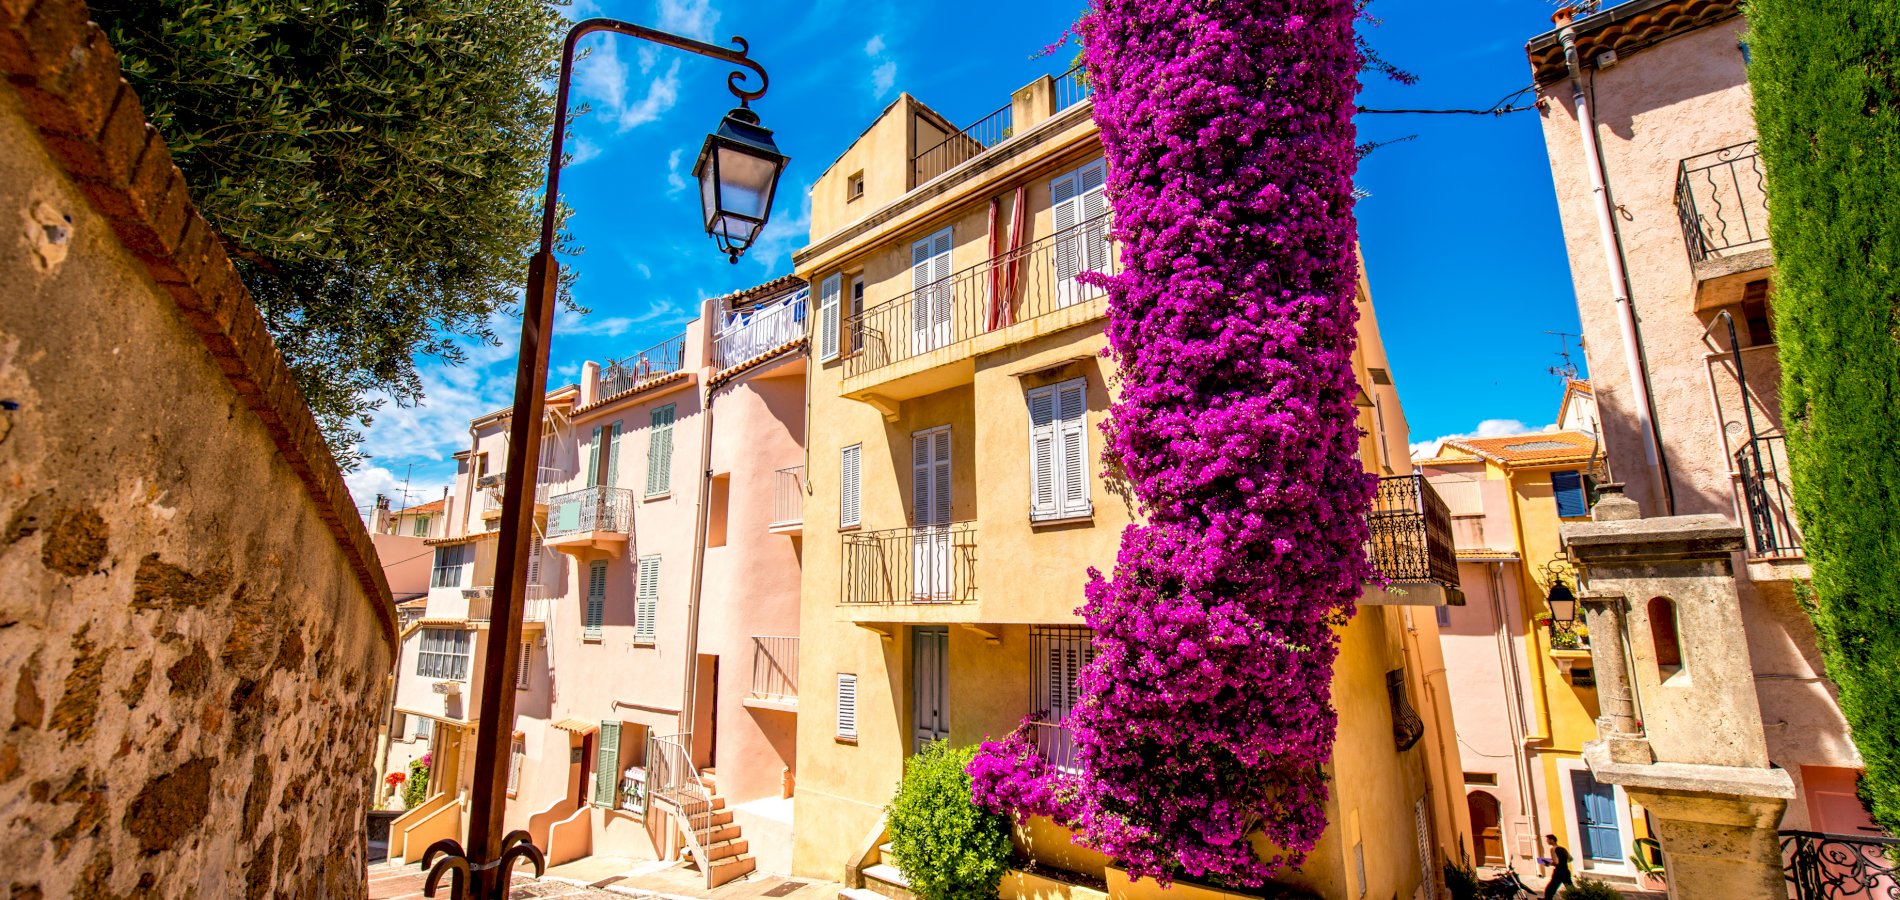 Ophorus Tours - A Private Half Day Trip From Nice to Cannes, Juan Les Pins & Antibes 